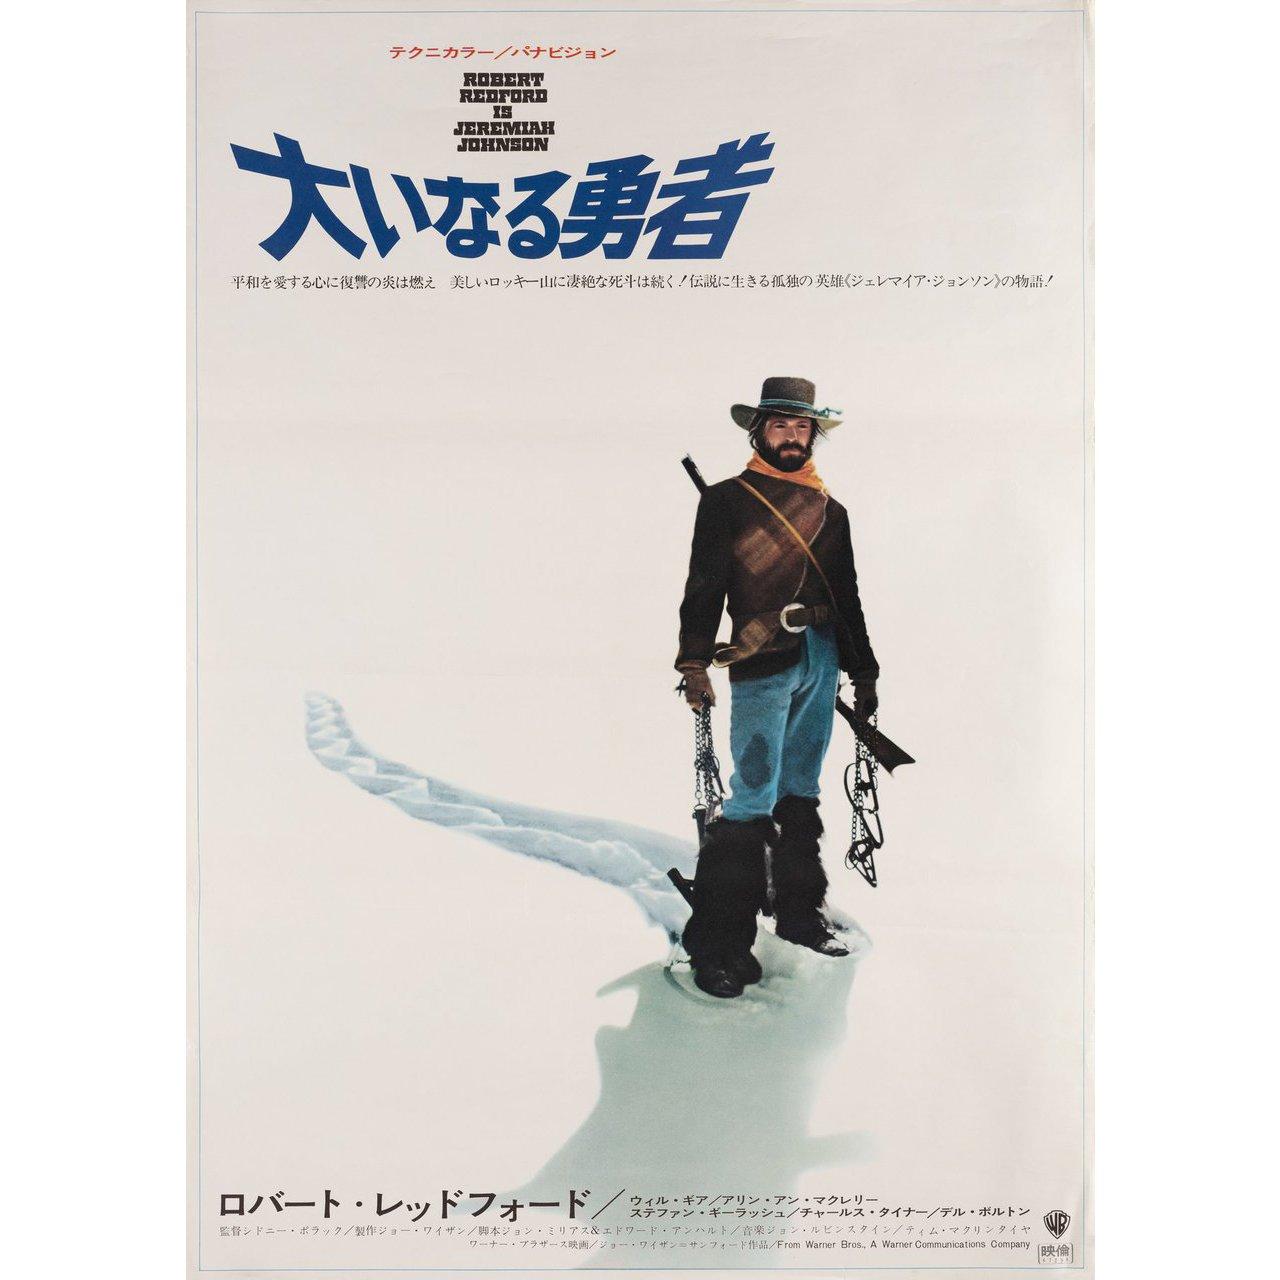 Original 1972 Japanese B2 poster for the film Jeremiah Johnson directed by Sydney Pollack with Robert Redford / Will Geer / Delle Bolton / Josh Albee. Very Good-Fine condition, folded. Many original posters were issued folded or were subsequently